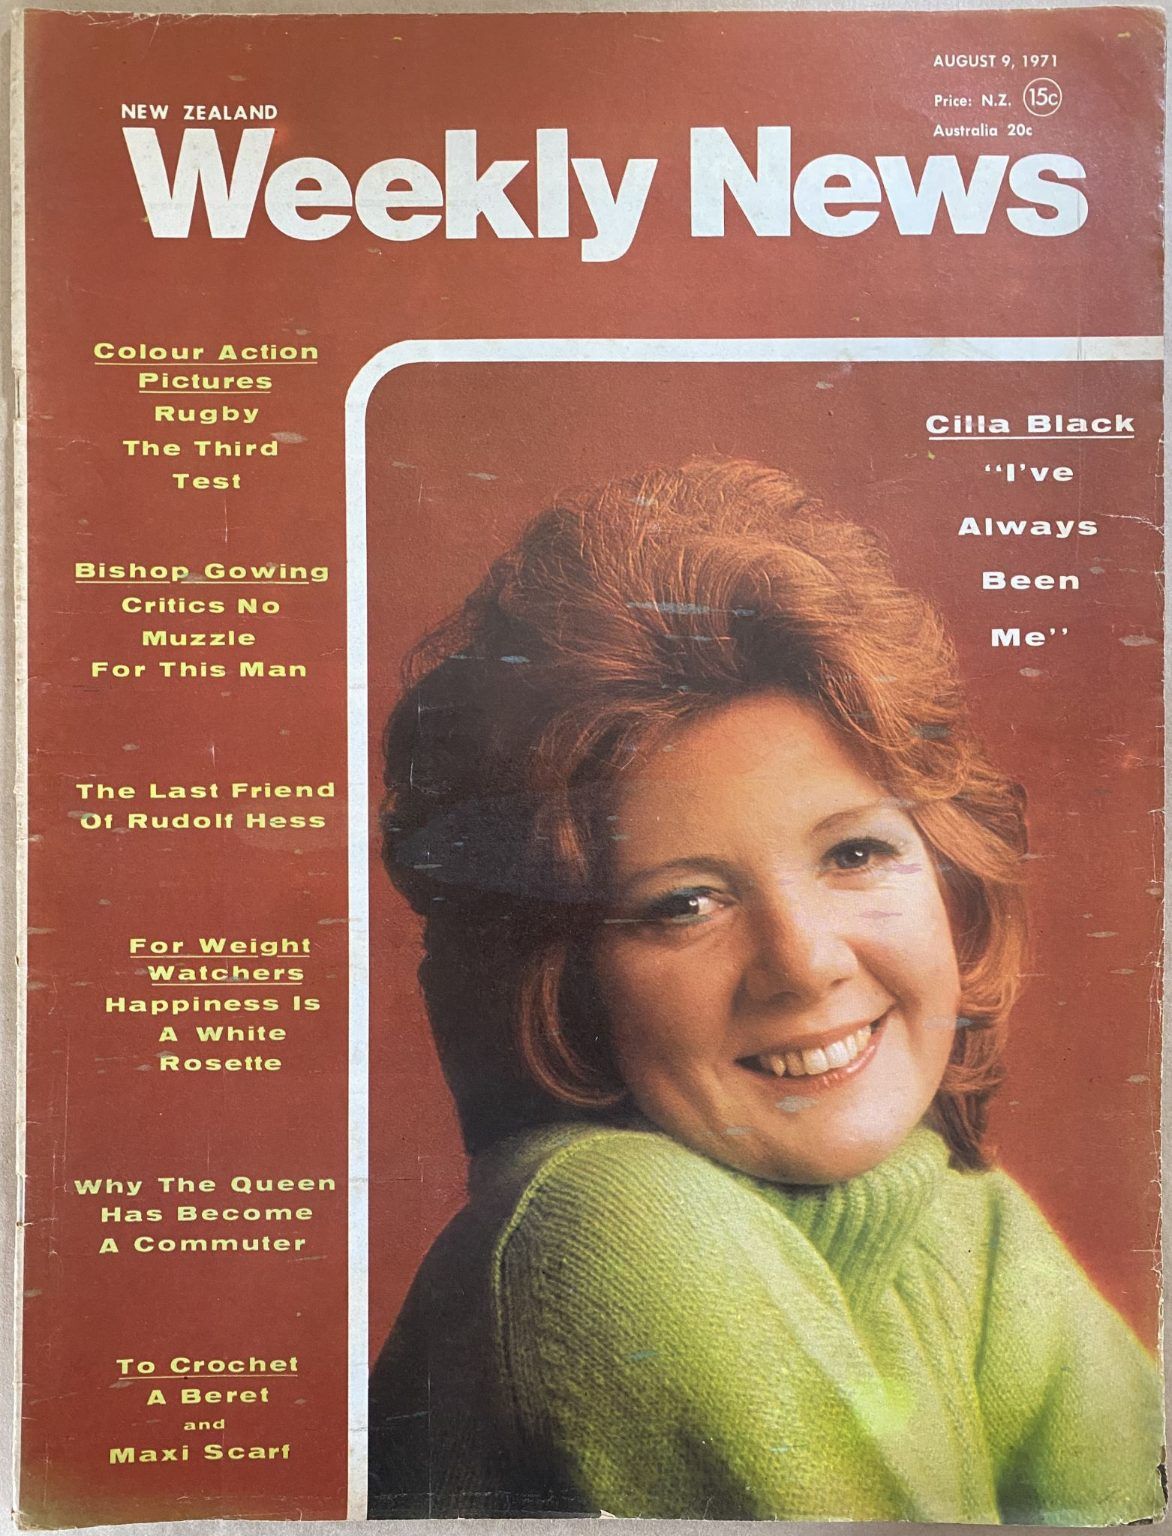 OLD NEWSPAPER: New Zealand Weekly News, No. 5617, 9 August 1971